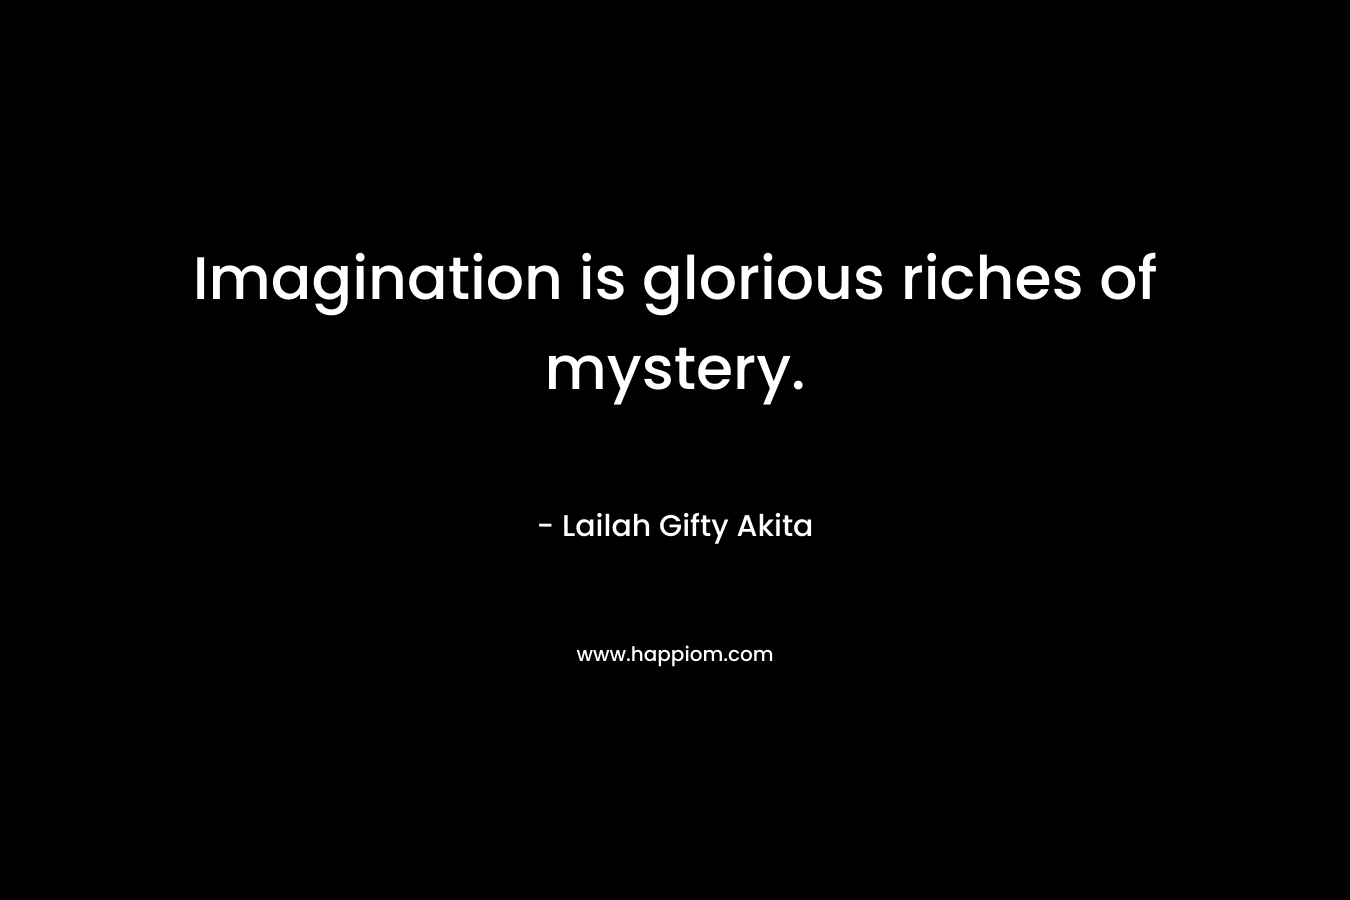 Imagination is glorious riches of mystery.